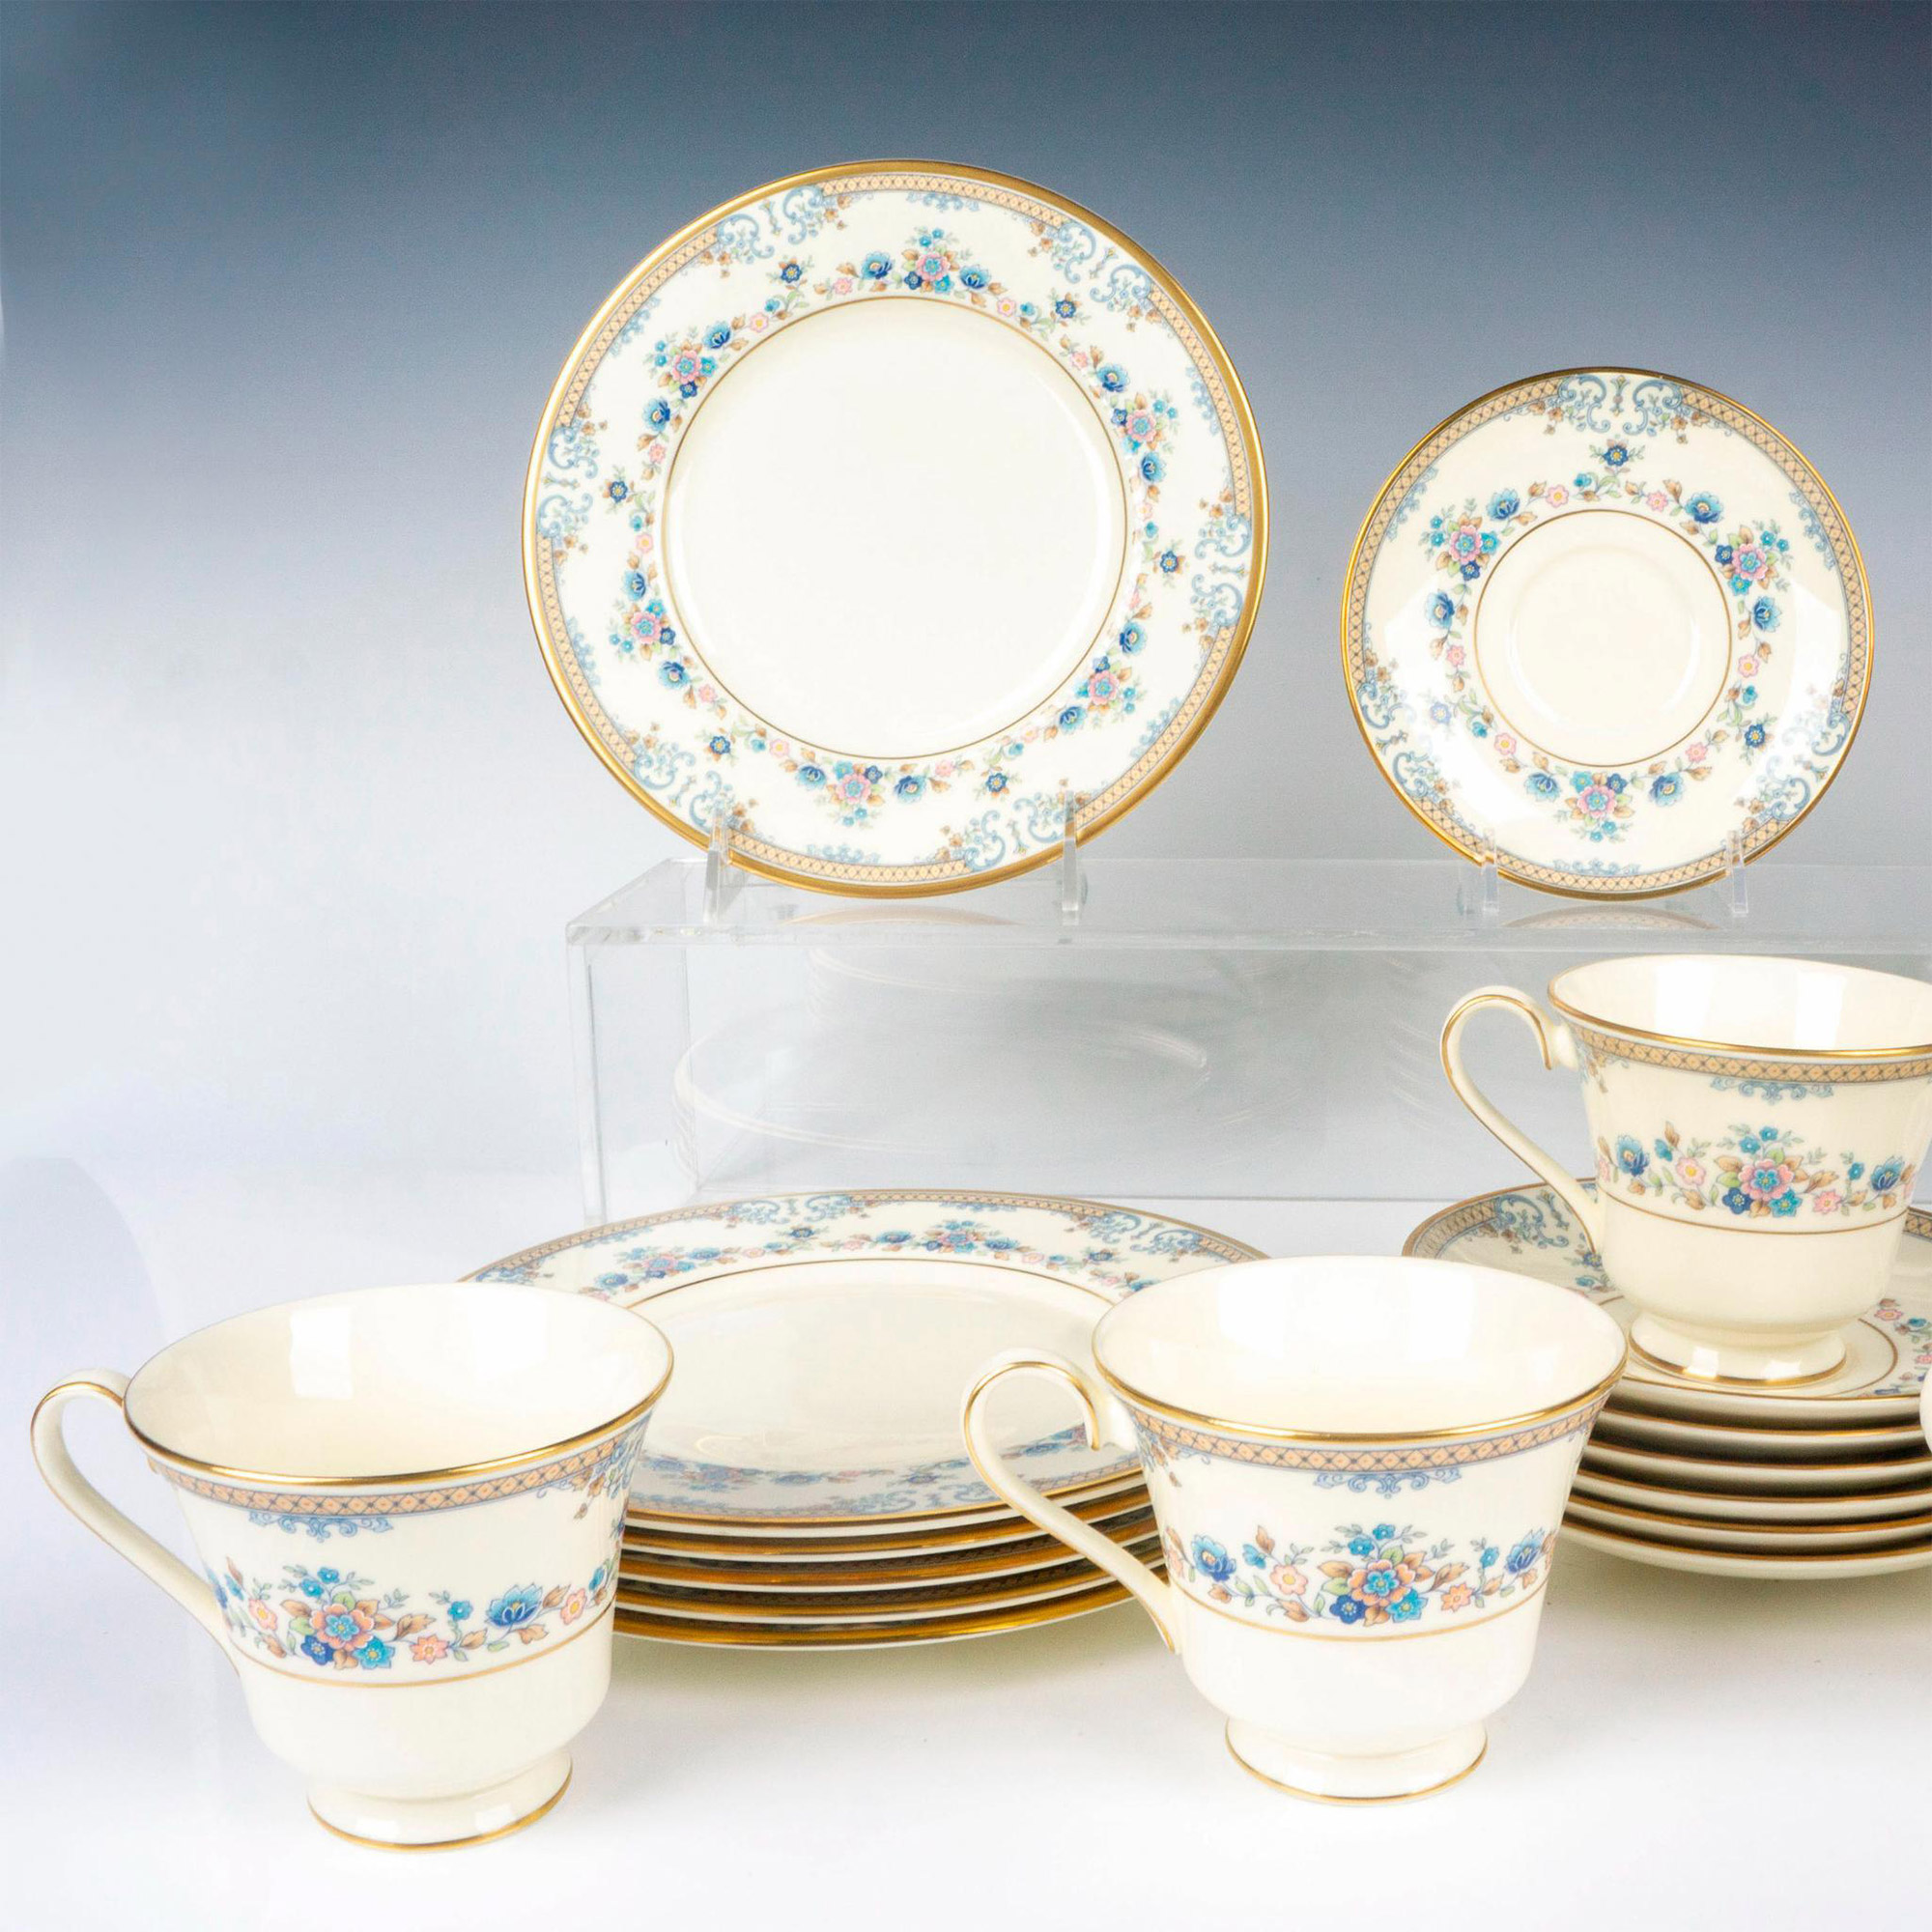 32pc Minton Porcelain Tableware Grouping - Image 2 of 4